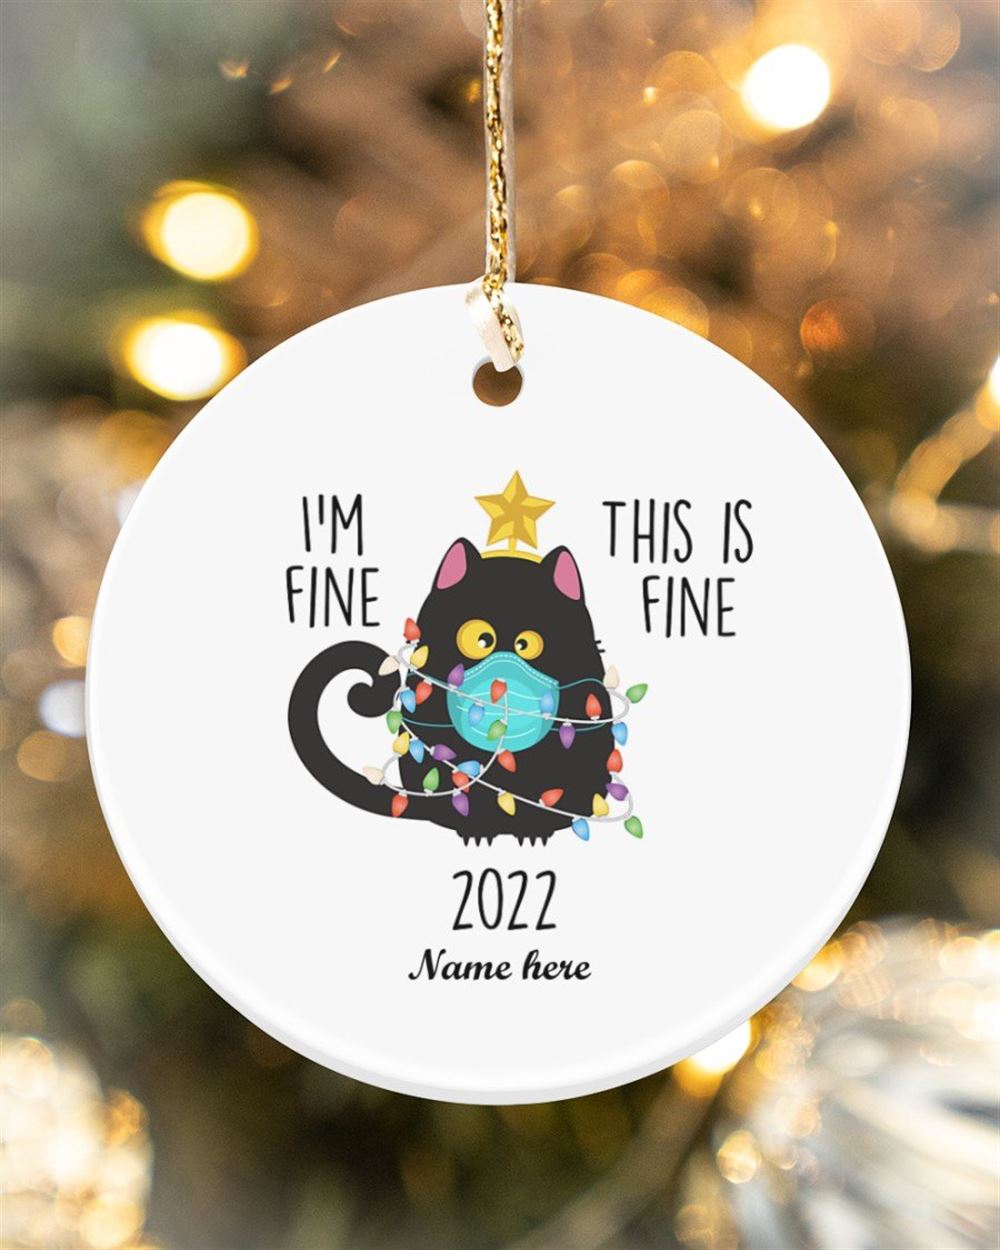 Personalized Christmas Gift Custom Name Ornament Cats 2022 Im Fine This Is Fine Circle Ornament 2 S